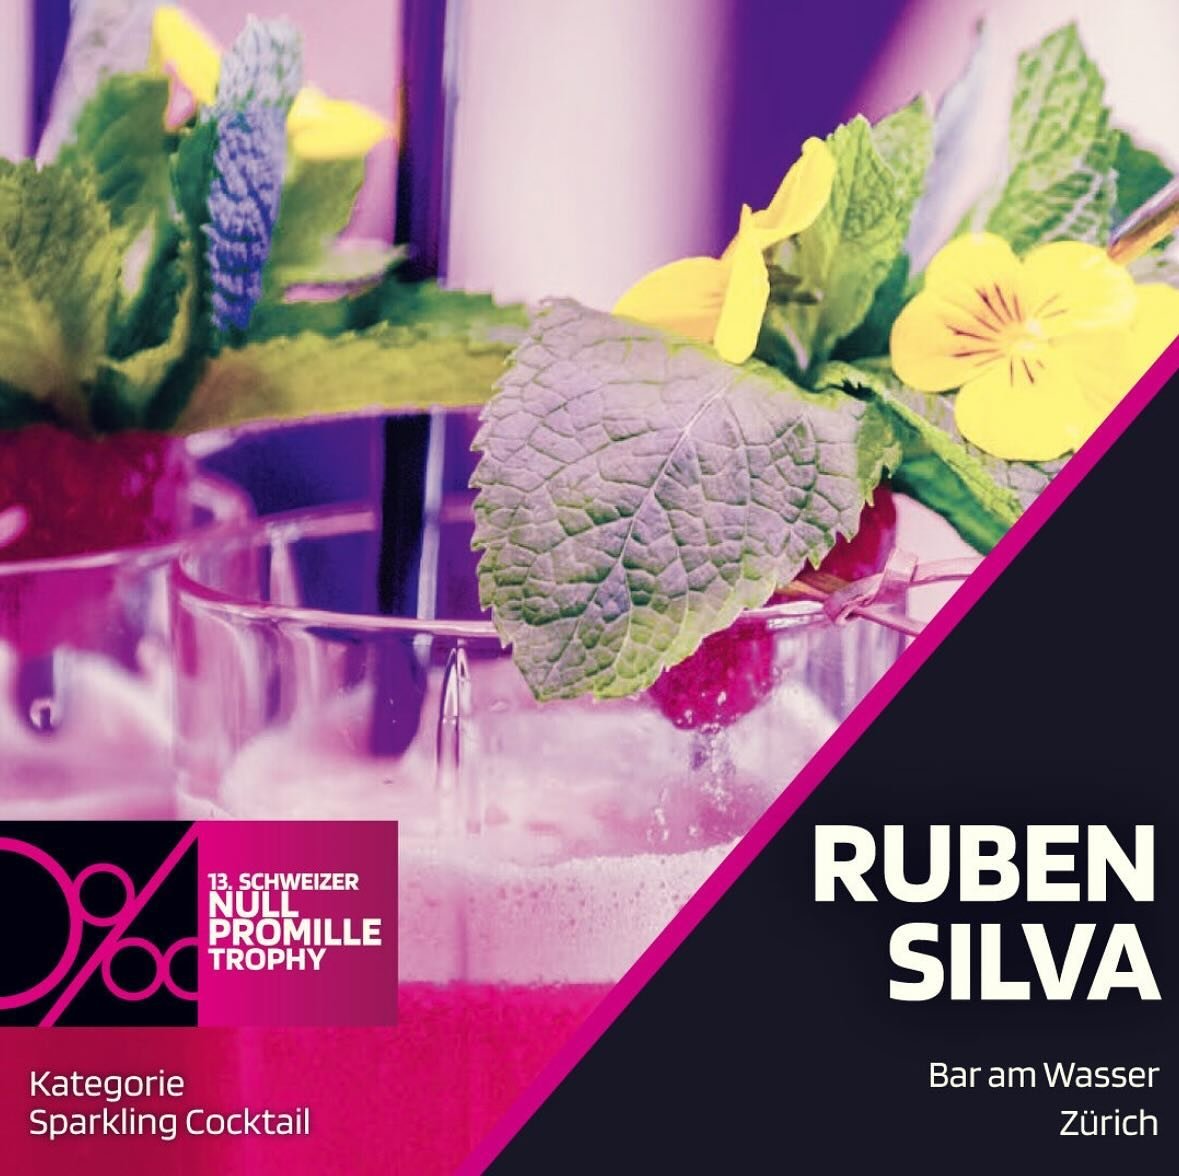 We super happy to anounce that our Ruben Silva has reached the final at the 0-Promille Trophy hosted by @barnews.ch ! 
Come and support Ruben on the 5th of Feb @sohobasel ! 
F
I
N
A
L
#baramwasser #zurich #cocktailbar #bar #bestbar #goingforgold #sup